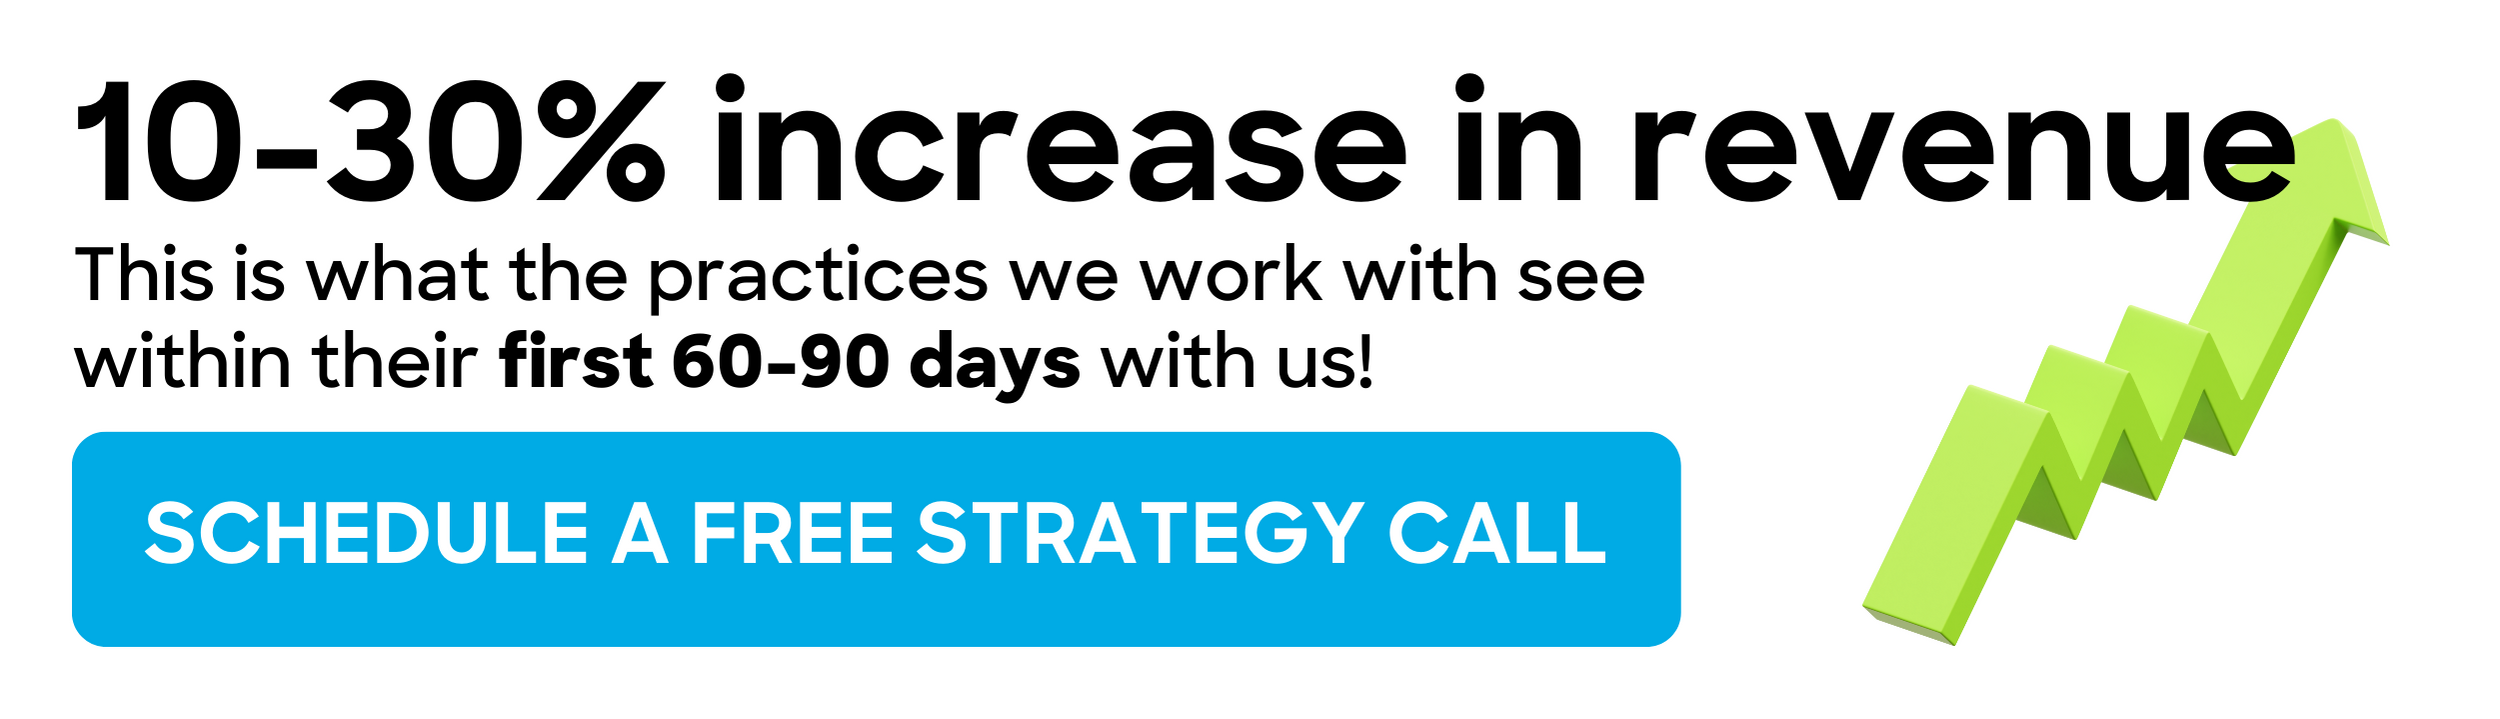 Schedule a Free Strategy Call and increase your practice profitability